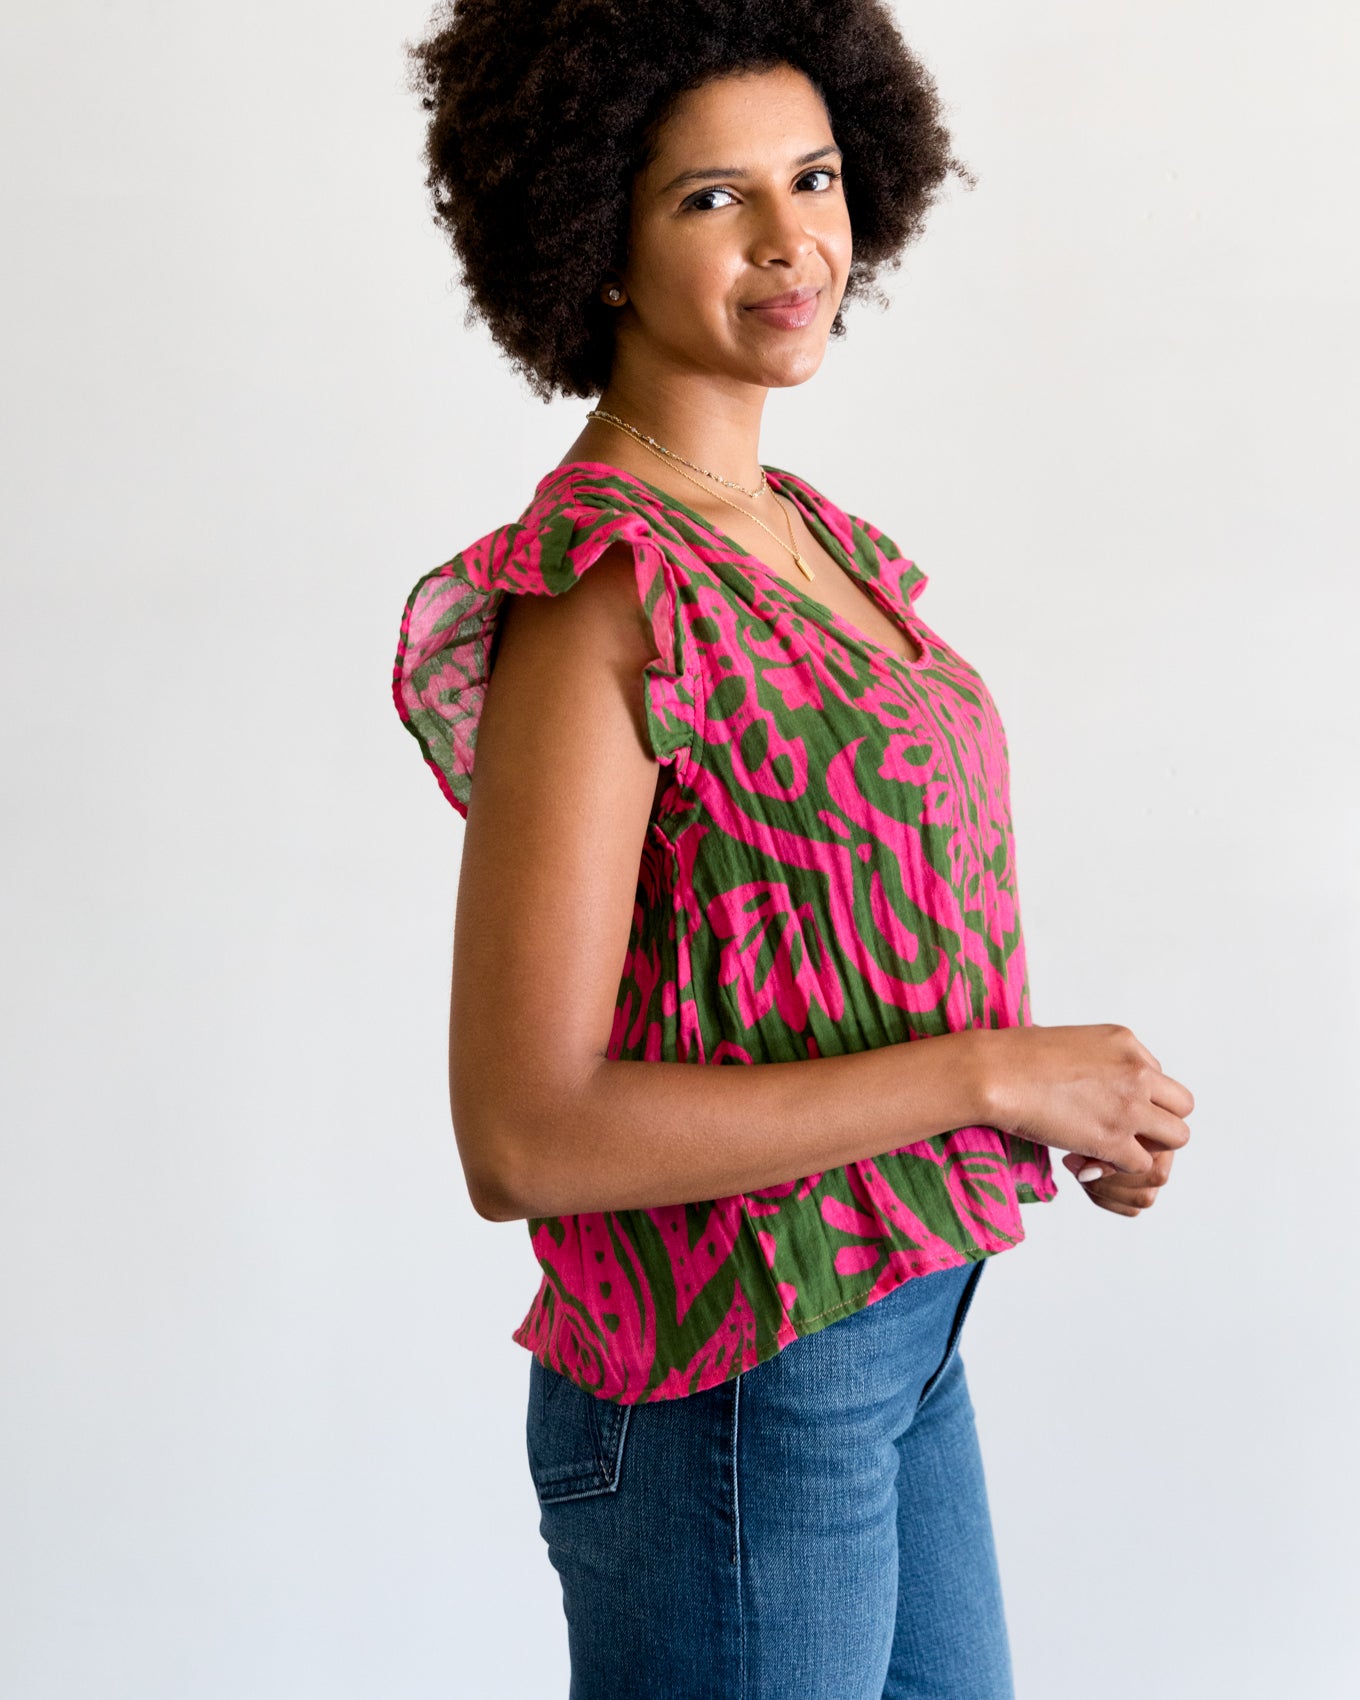 velvet by Graham and Spencer Aleah Top in Pink